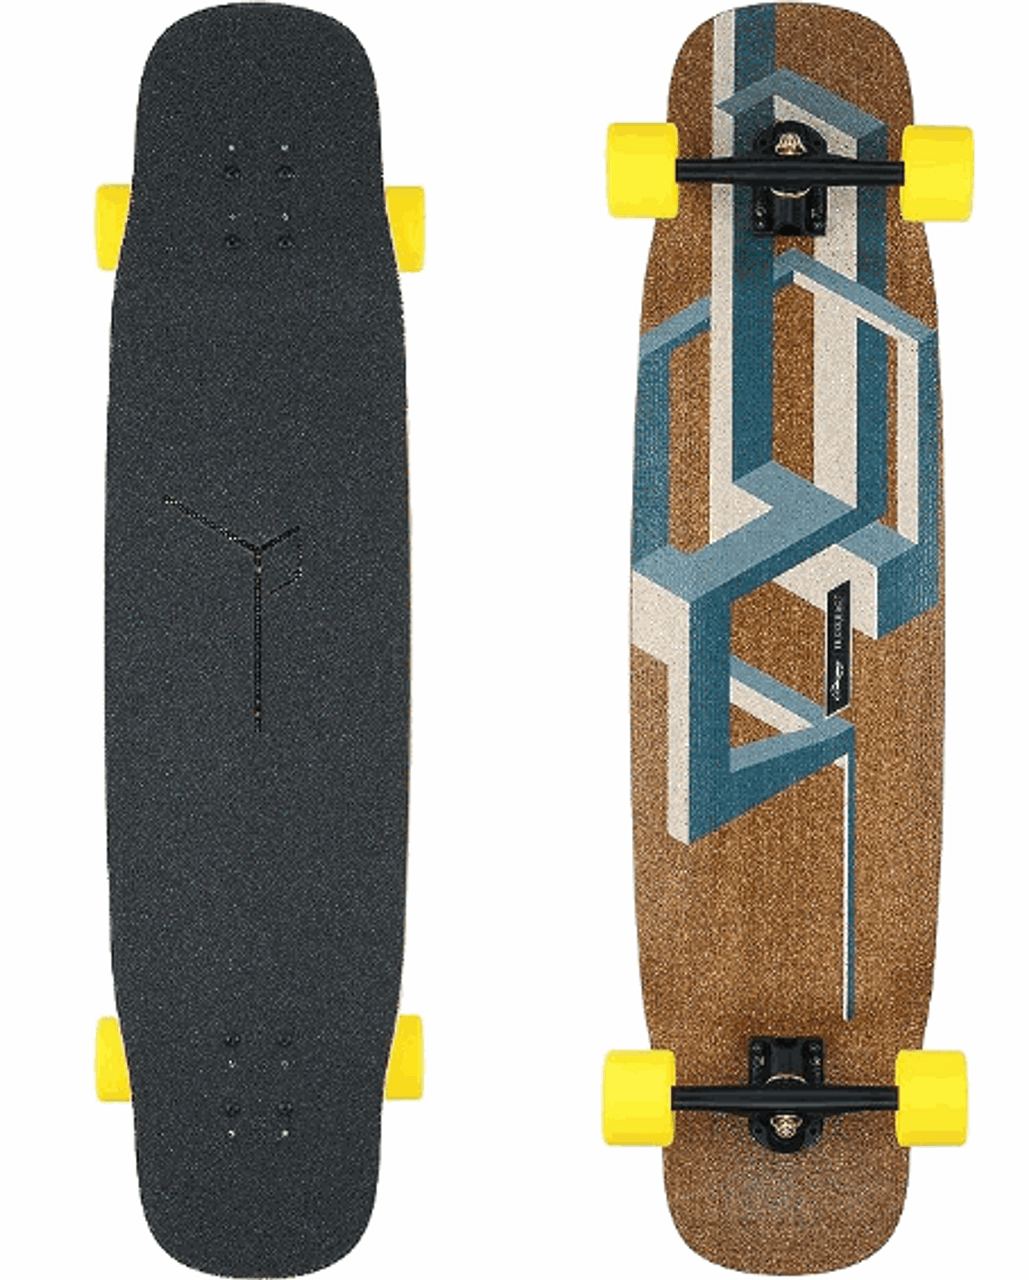 Loaded Cantellated Tesseract Longboard Complete